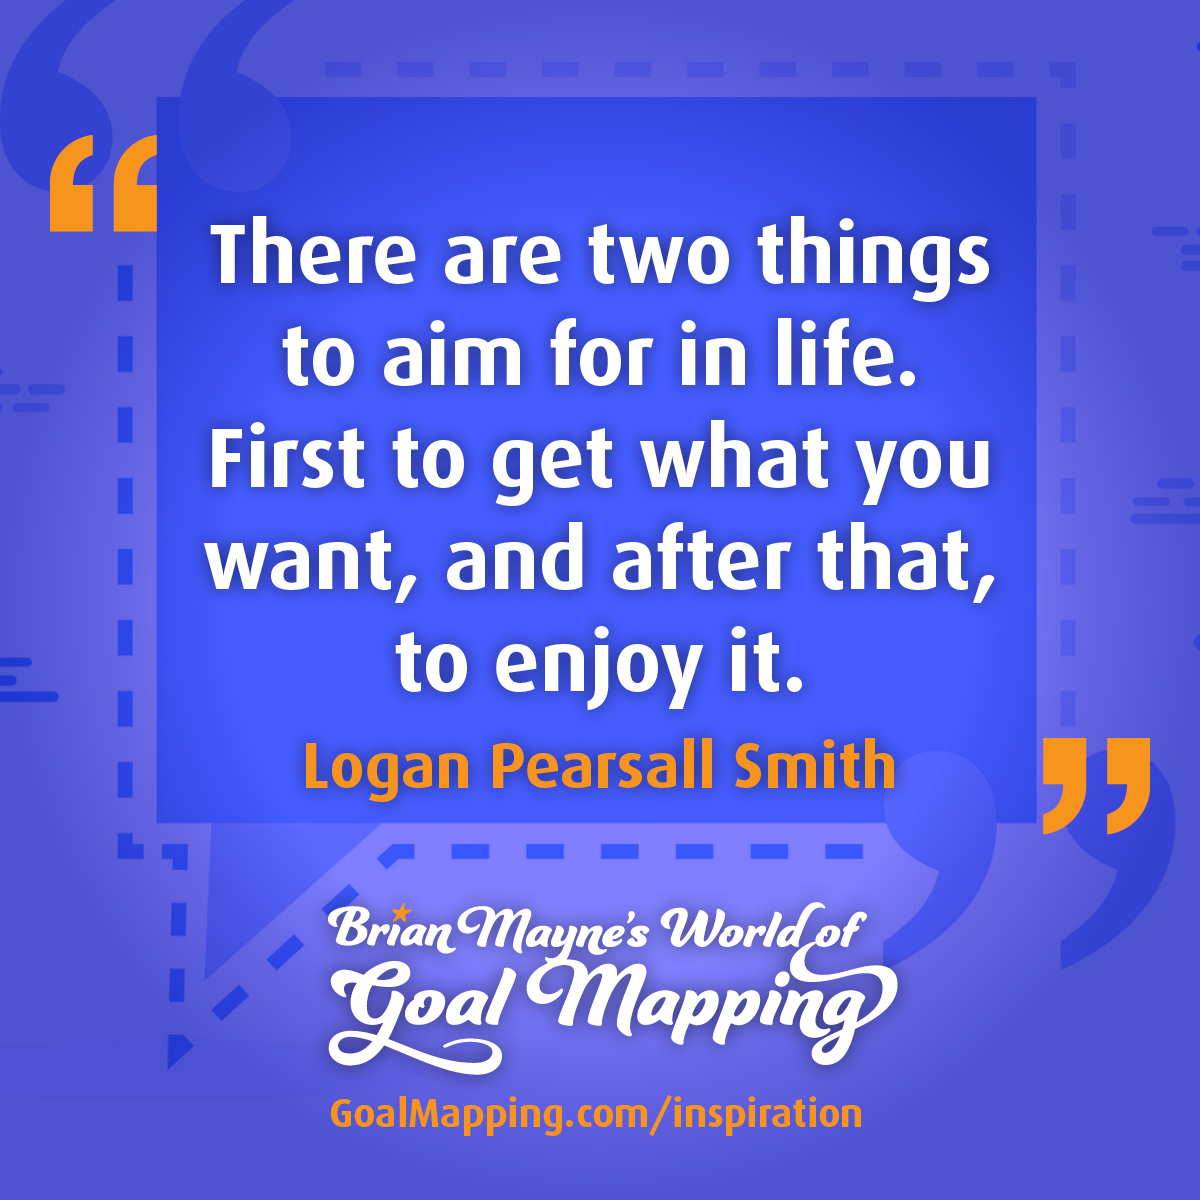 "There are two things to aim for in life. First to get what you want, and after that, to enjoy it." Logan Pearsall Smith